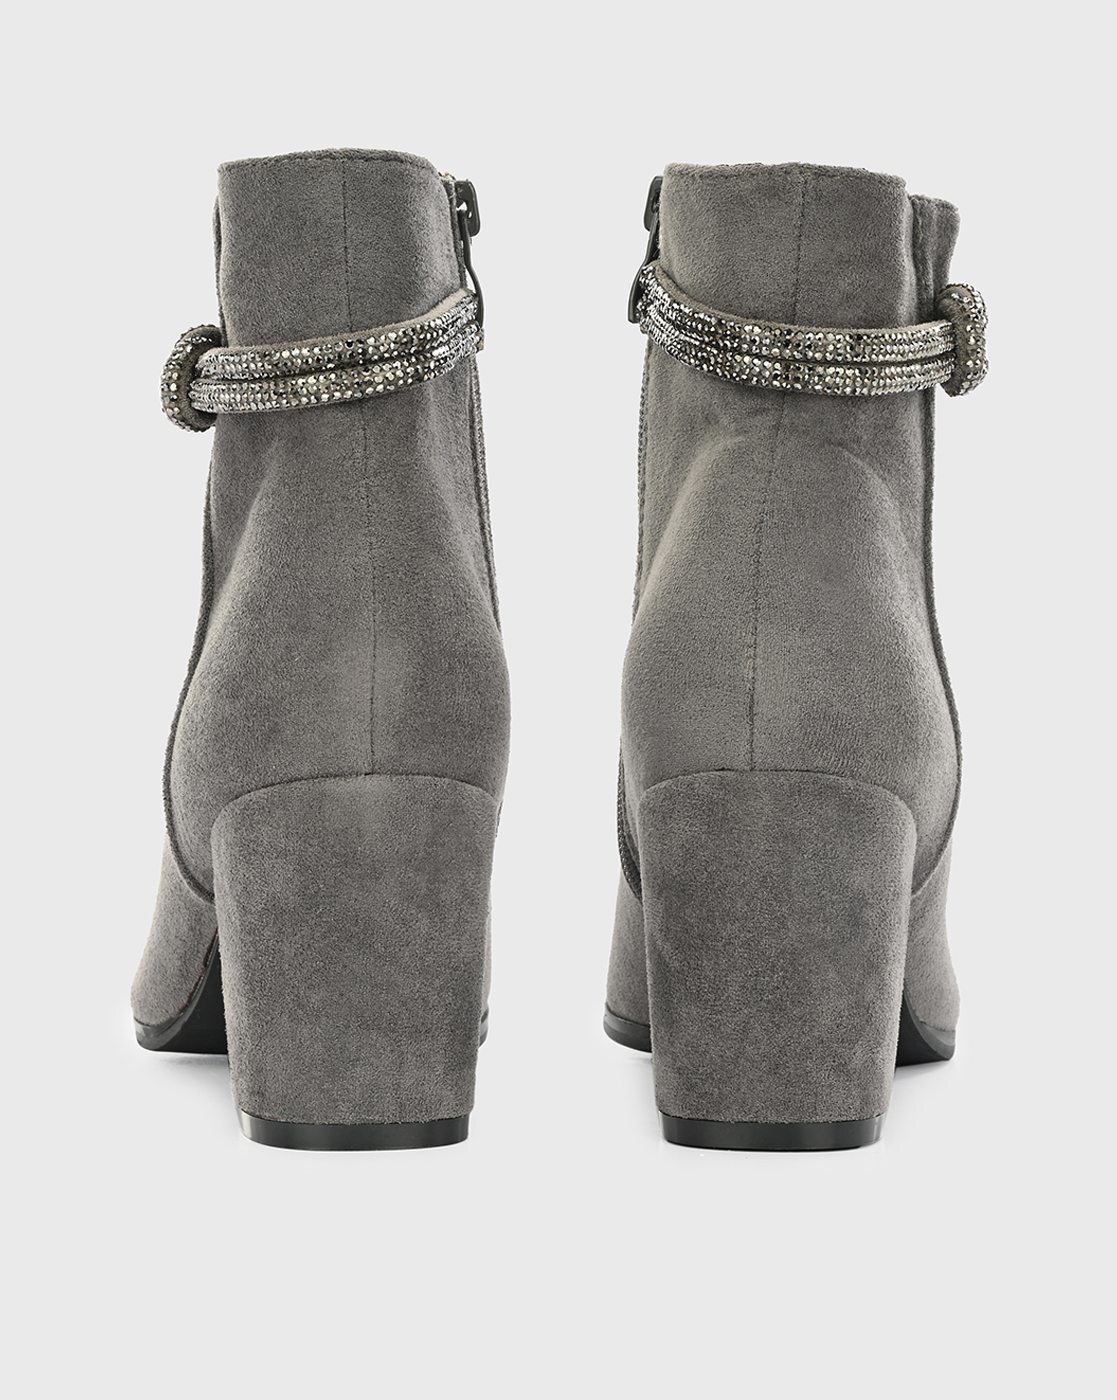 How To Wear Grey Boots - Shades of Grey - VSTYLE